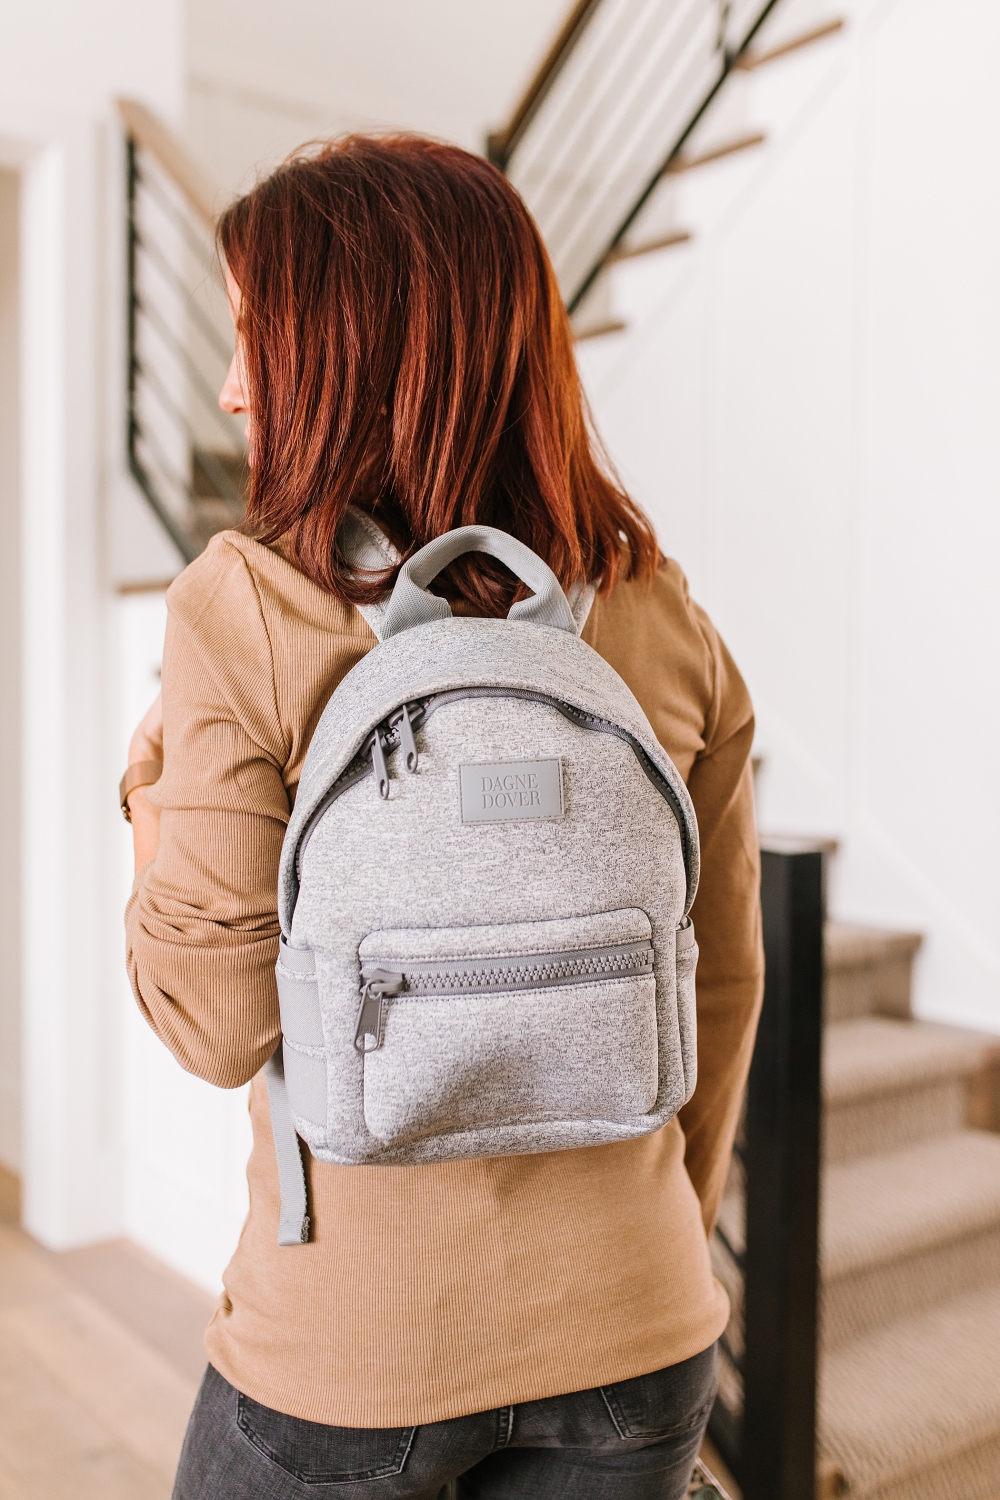 Dagne Dover Dakota Backpack Review: This Backpack Is My Favorite Yet